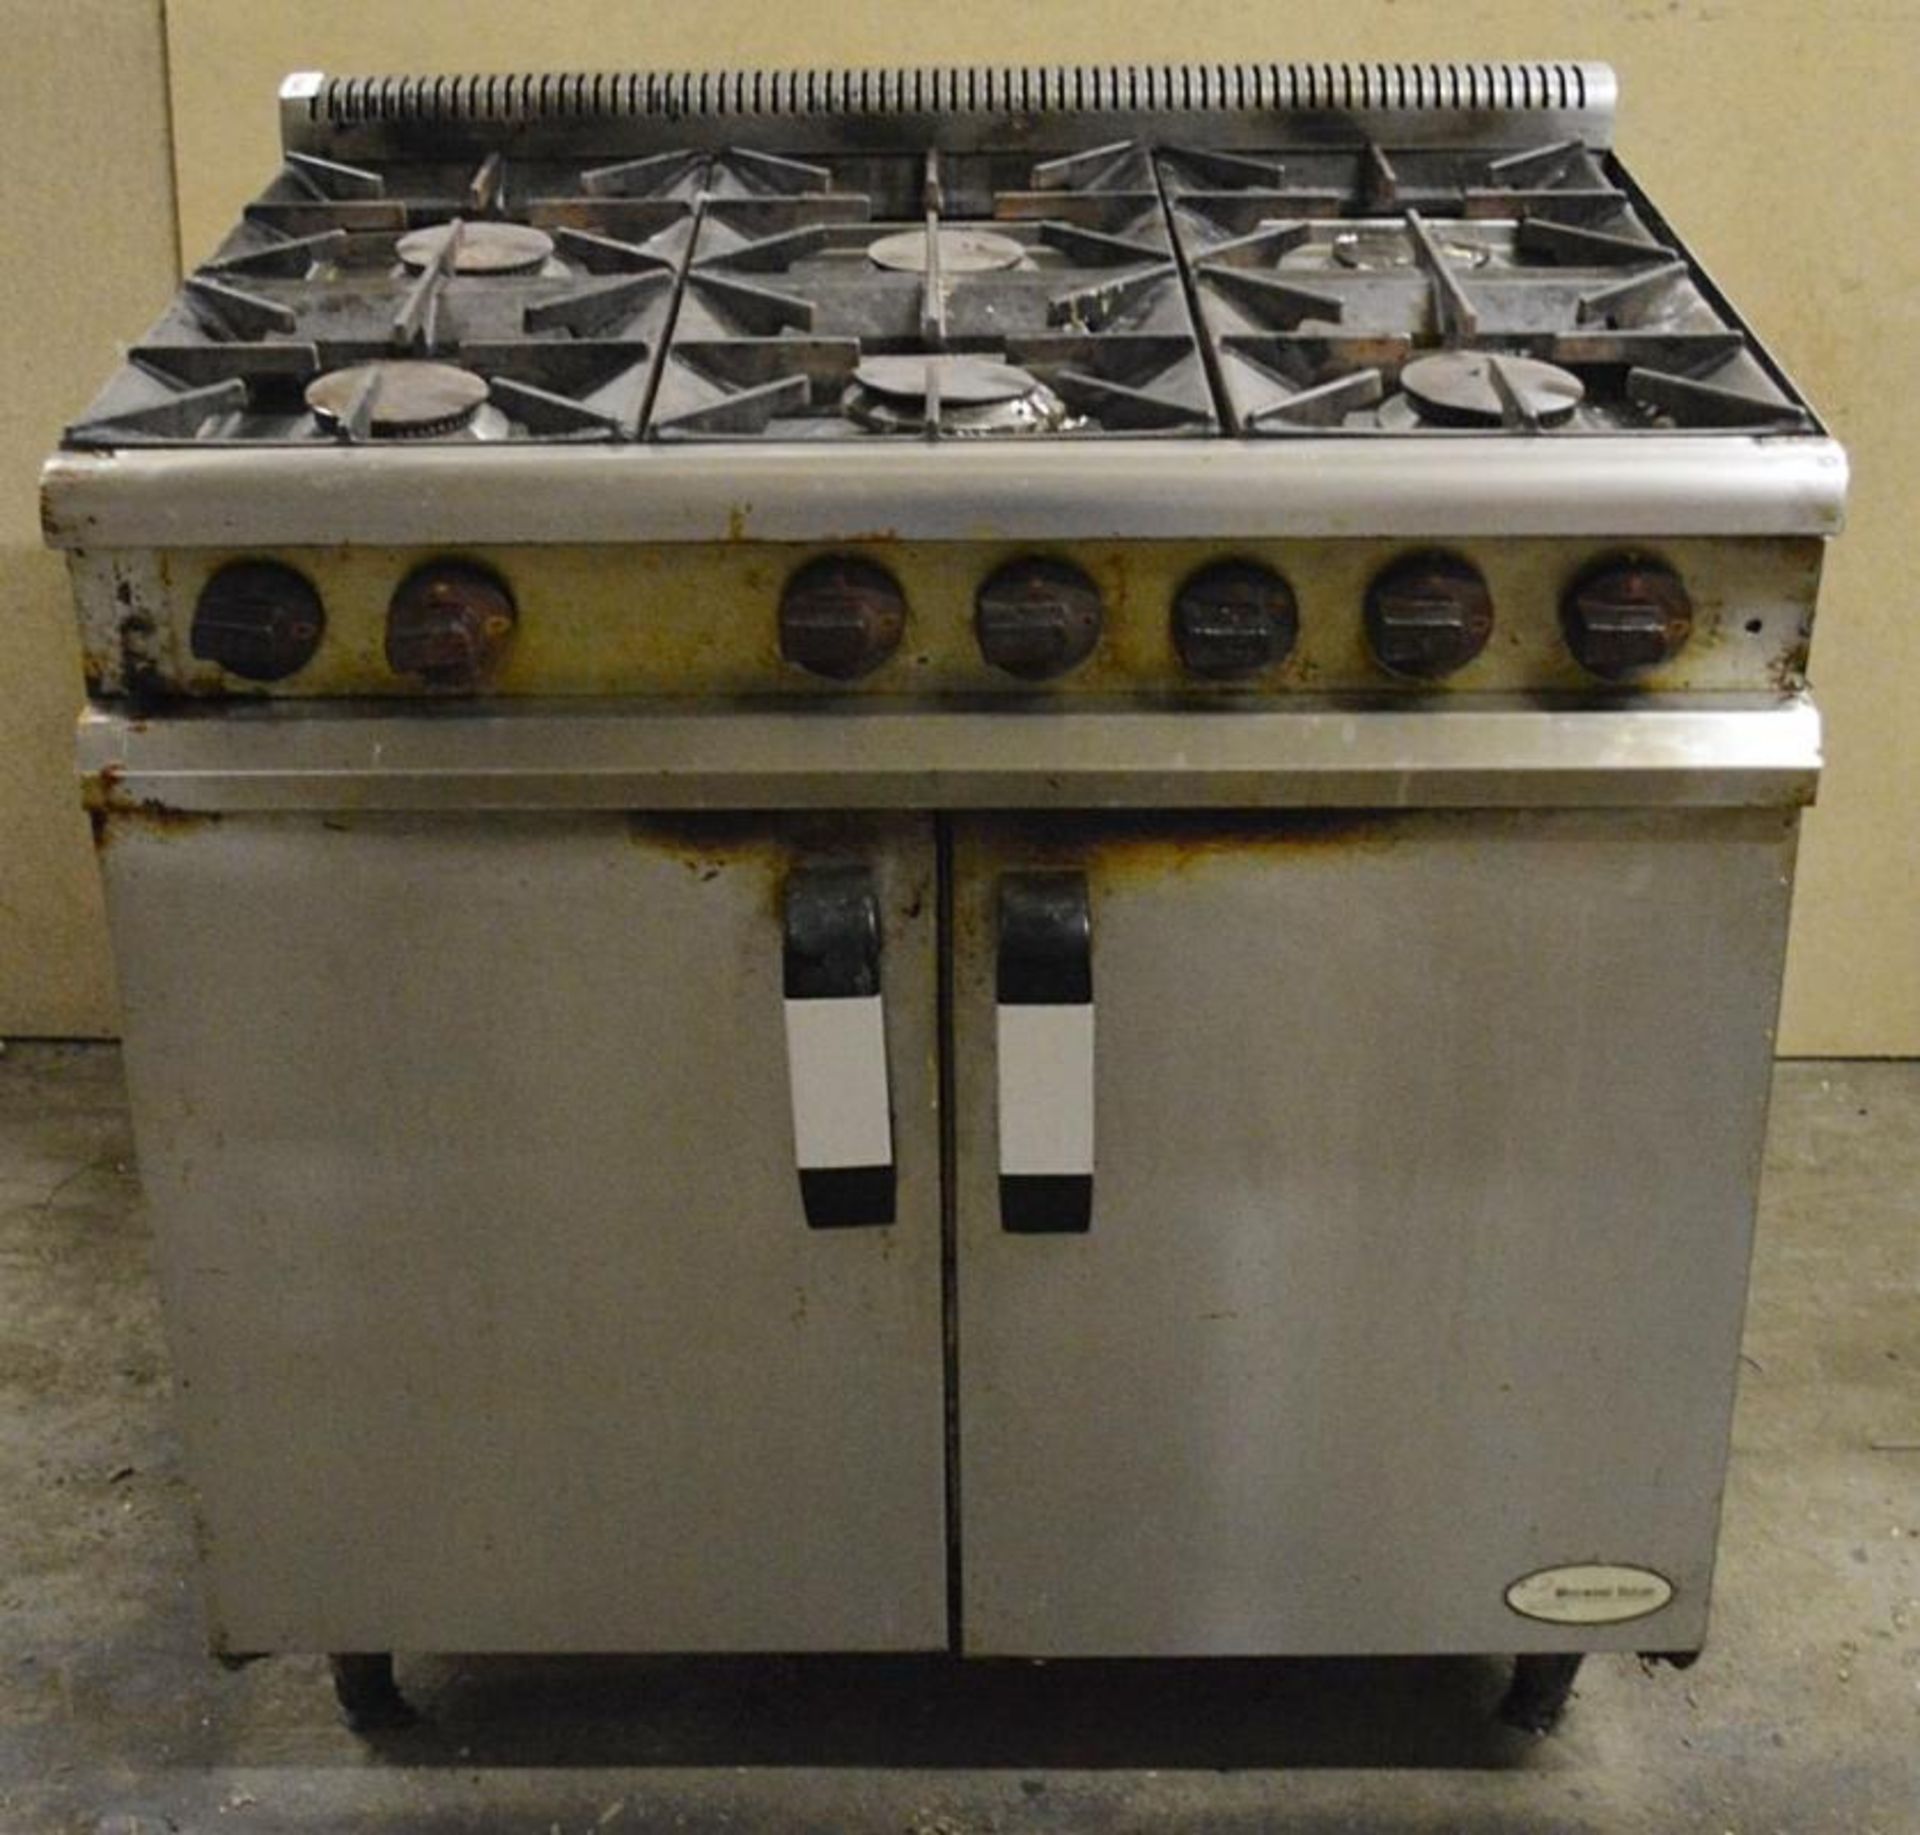 1 x Masterchef Moorwood Vulcan Six Burner Gas Oven Range - Stainless Steel Exterior With Heavy - Image 3 of 3